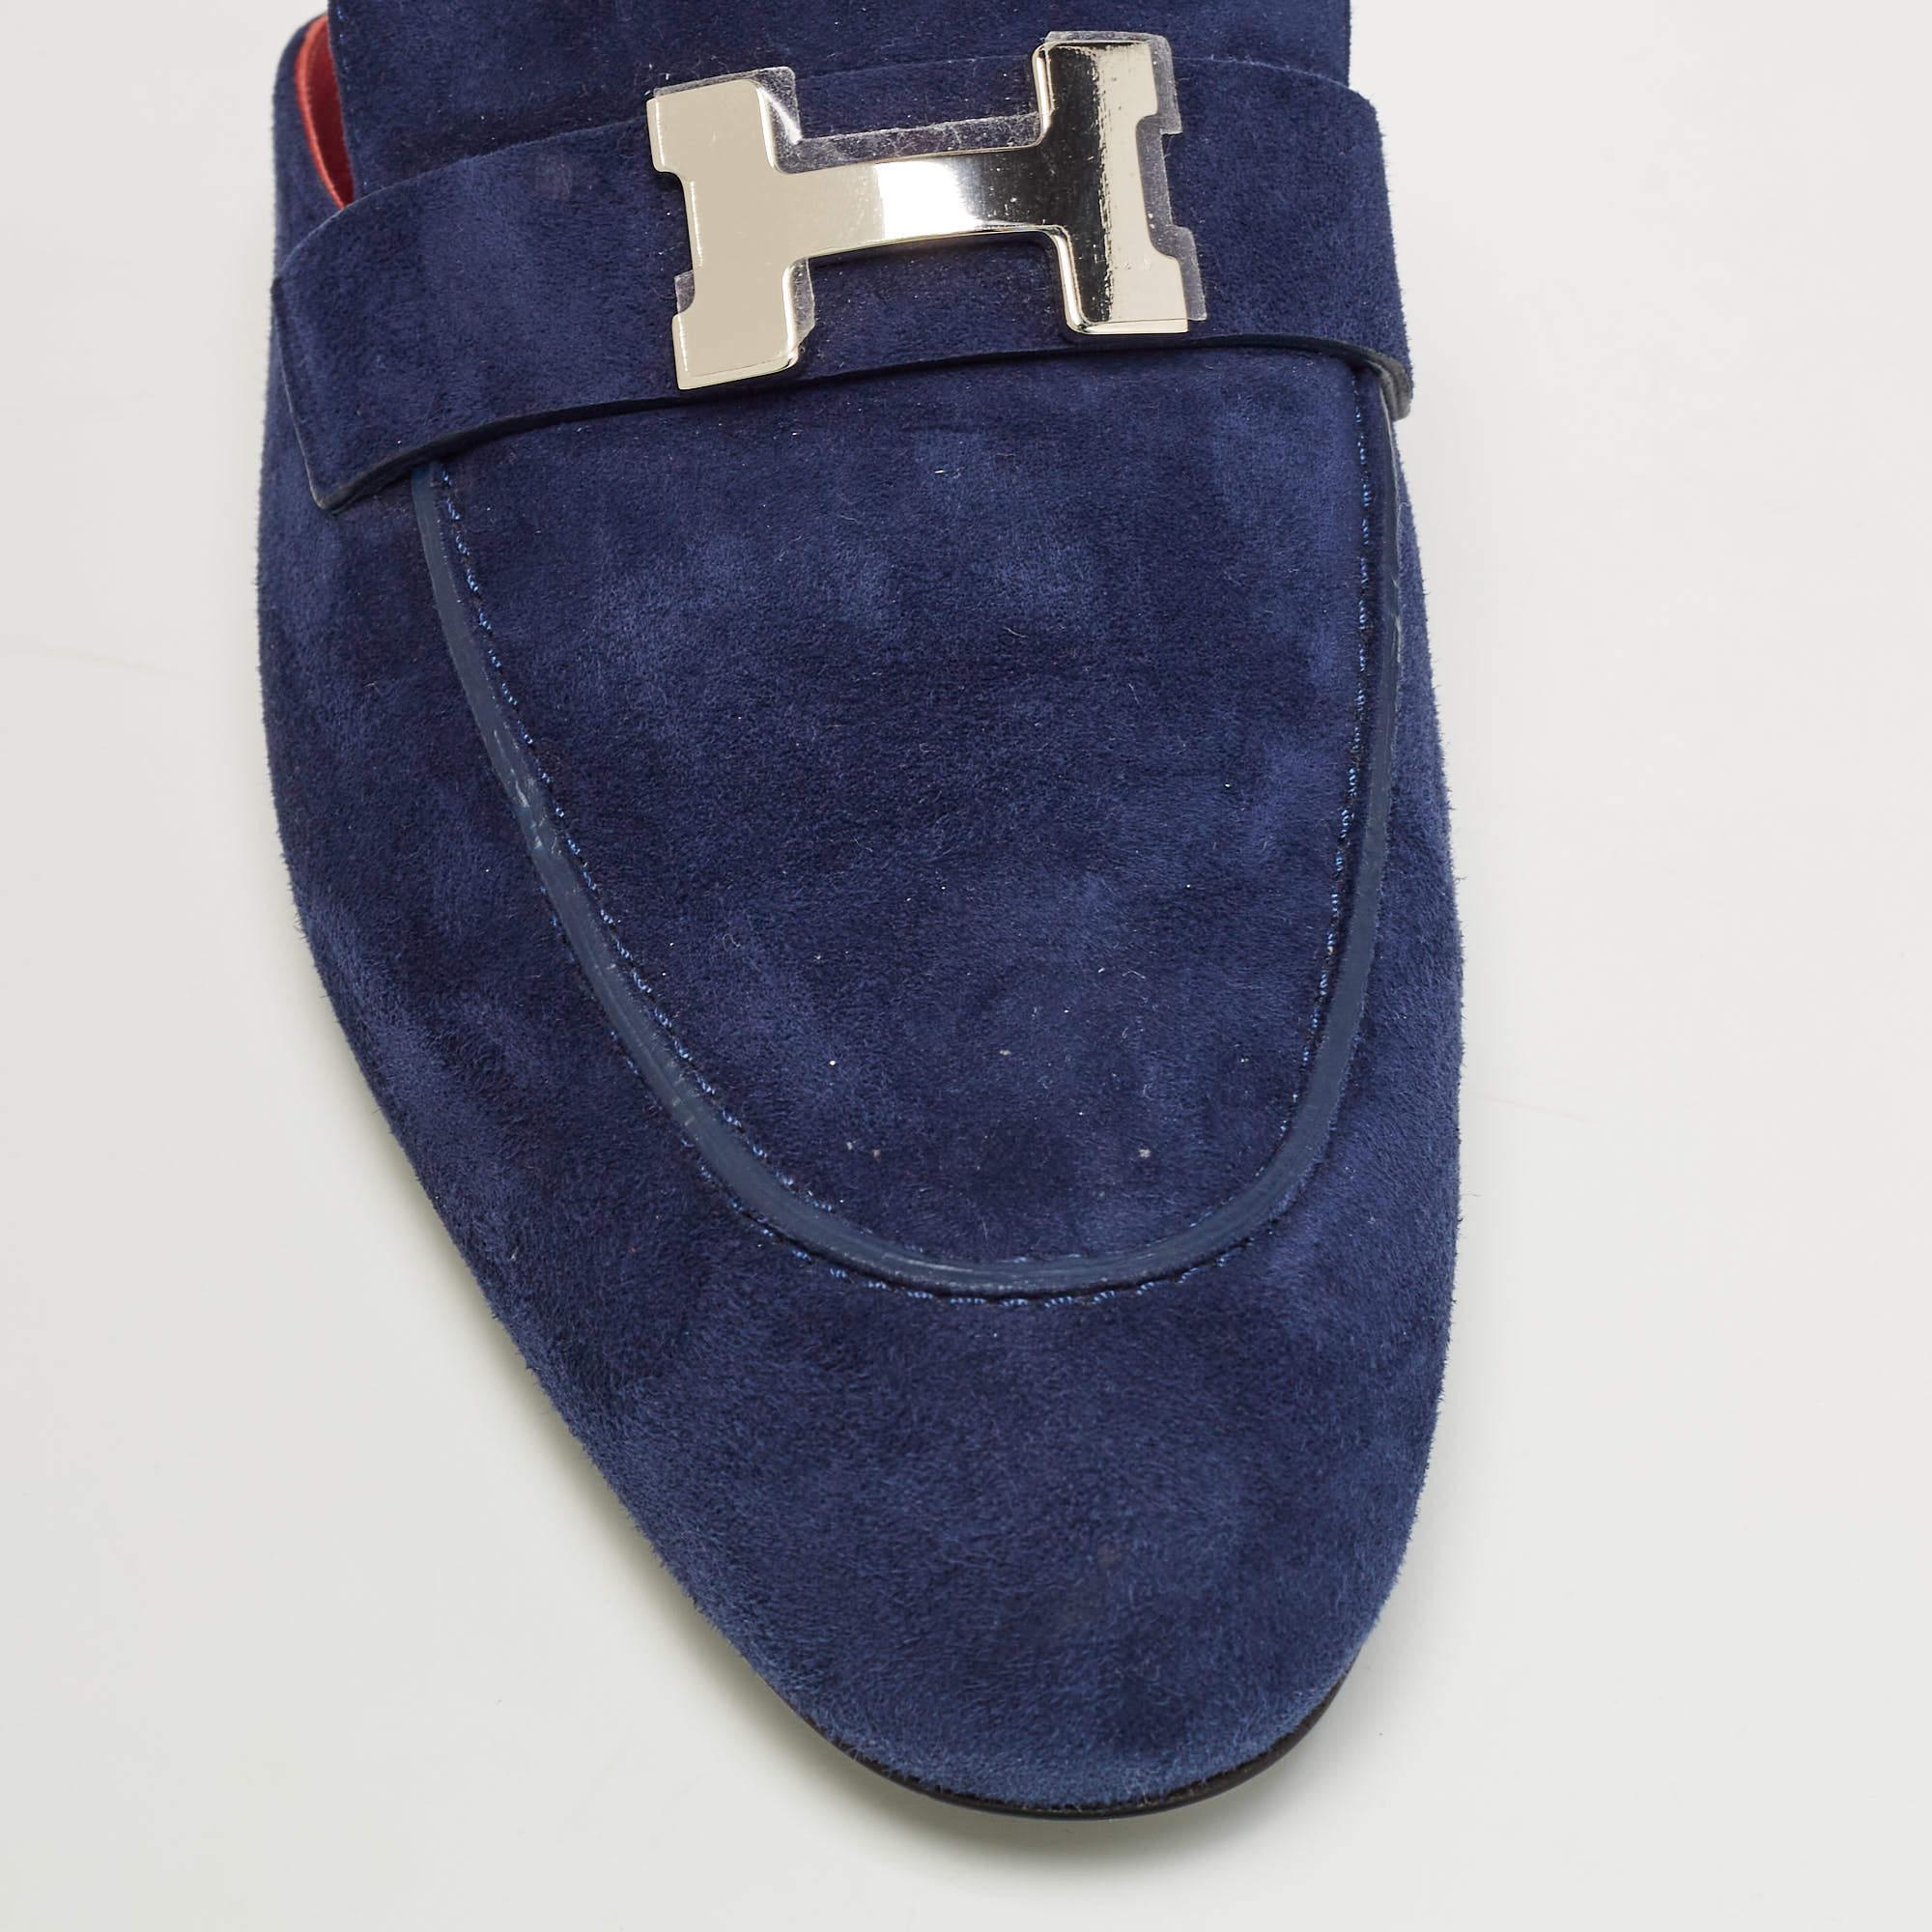 Hermes Navy Blue Suede Trocadero Mules Size 39.5 For Sale 3